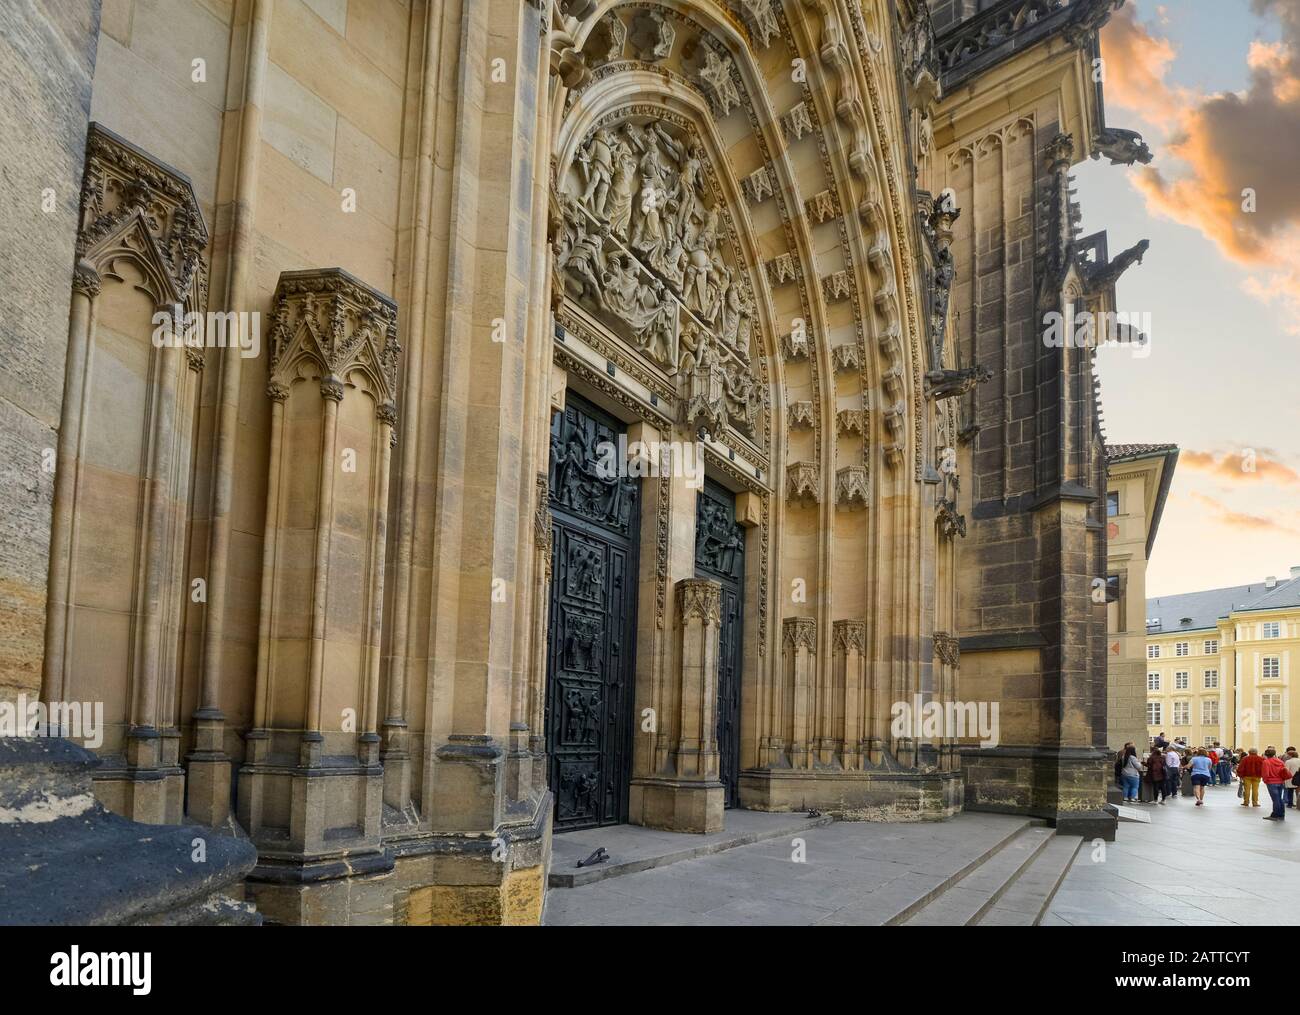 The imposing gothic facade and doors to St. Vitus Cathedral in the Prague Castle Complex in the Czech Republic Stock Photo